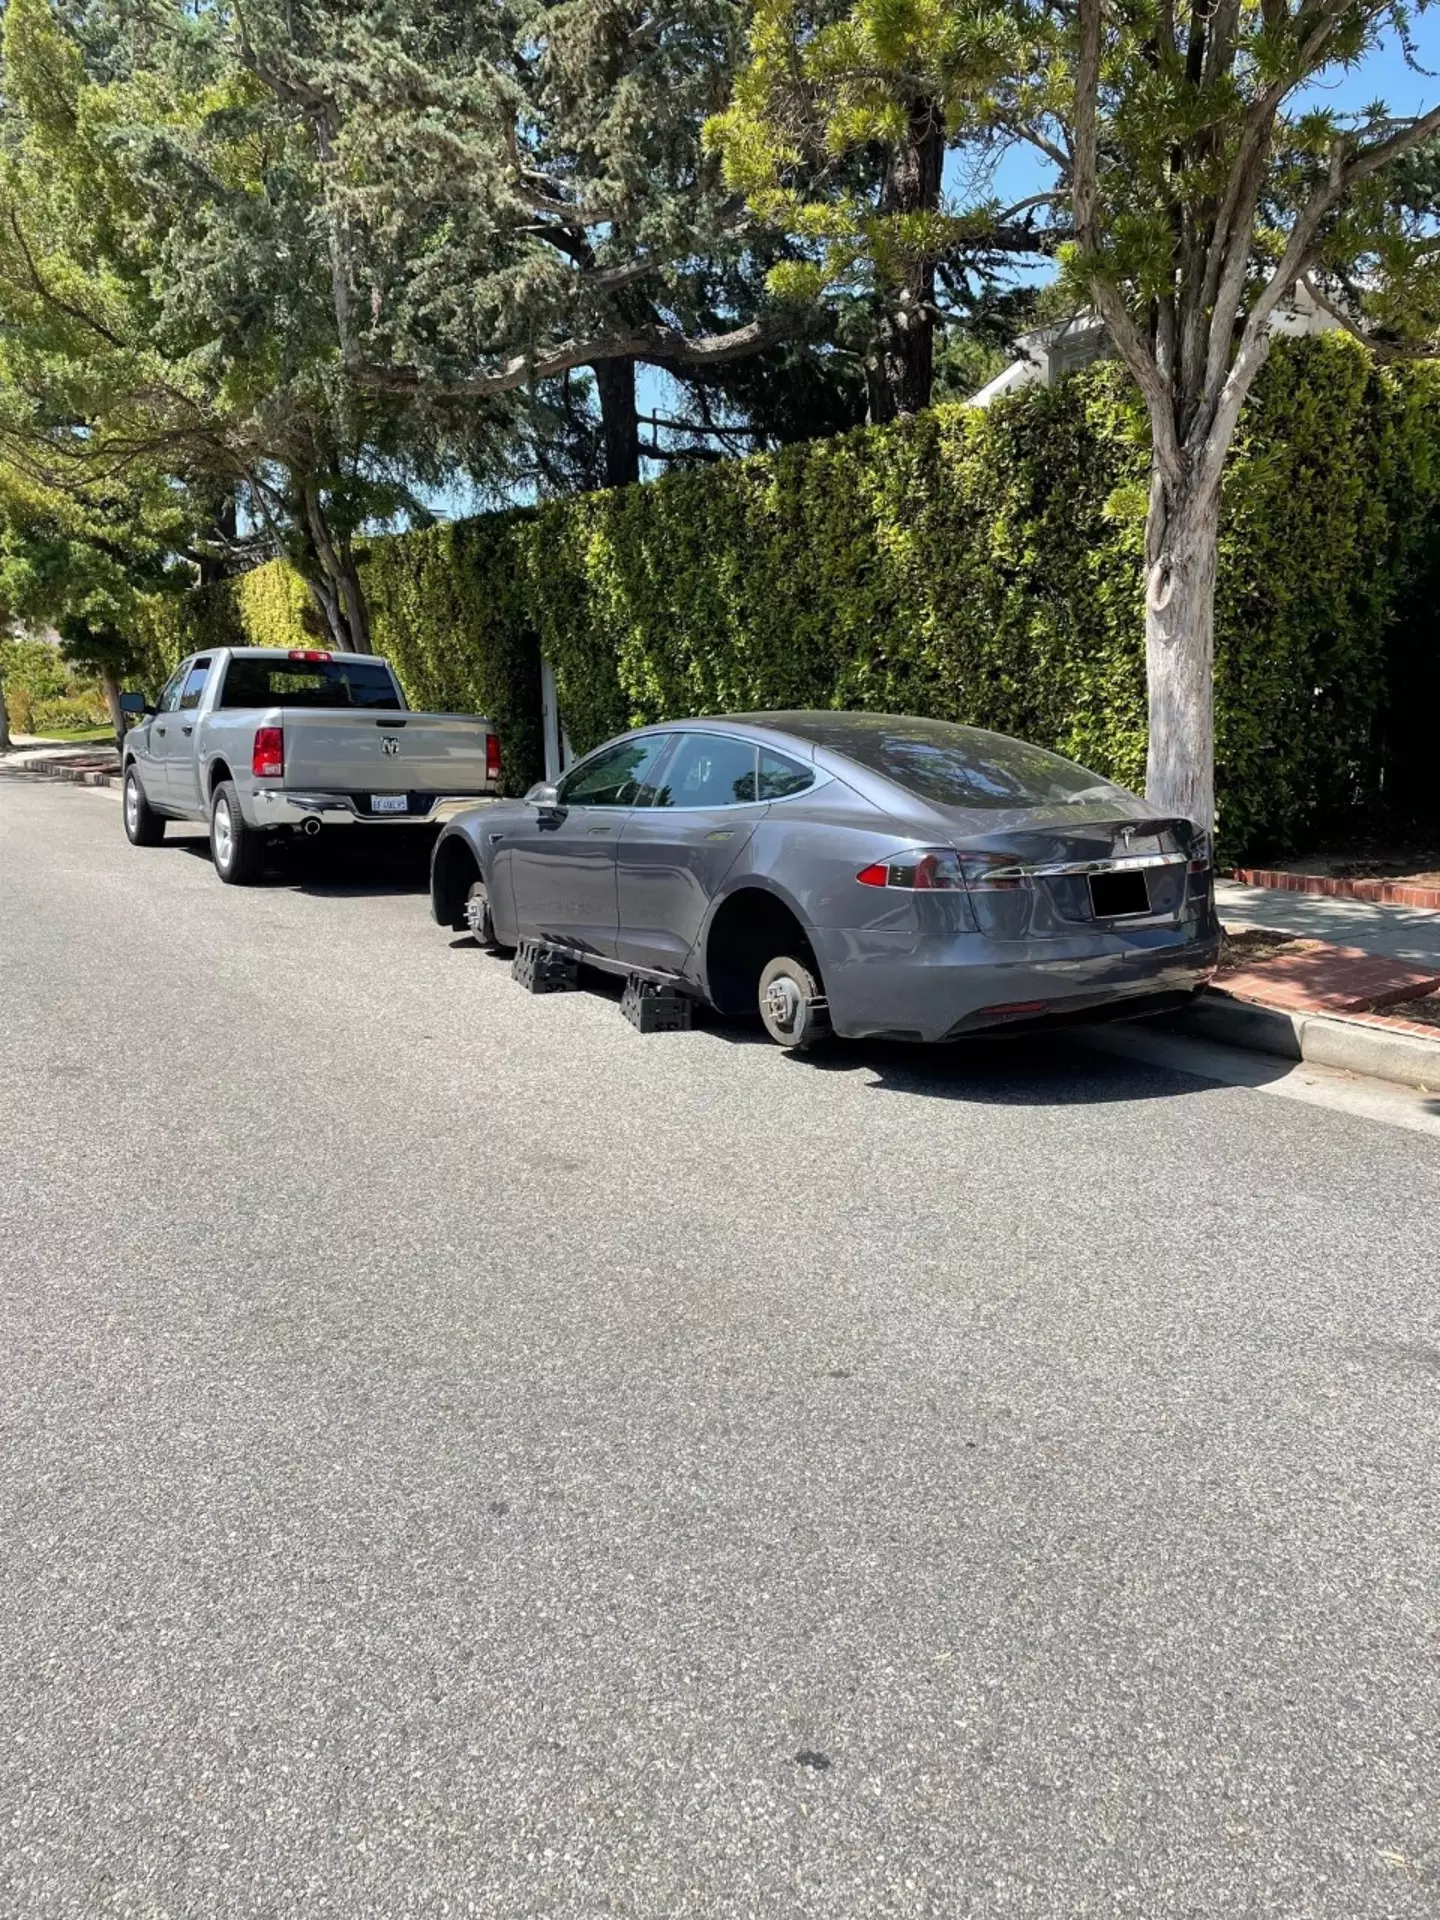 The Tesla parked outside Owen Wilson's home.